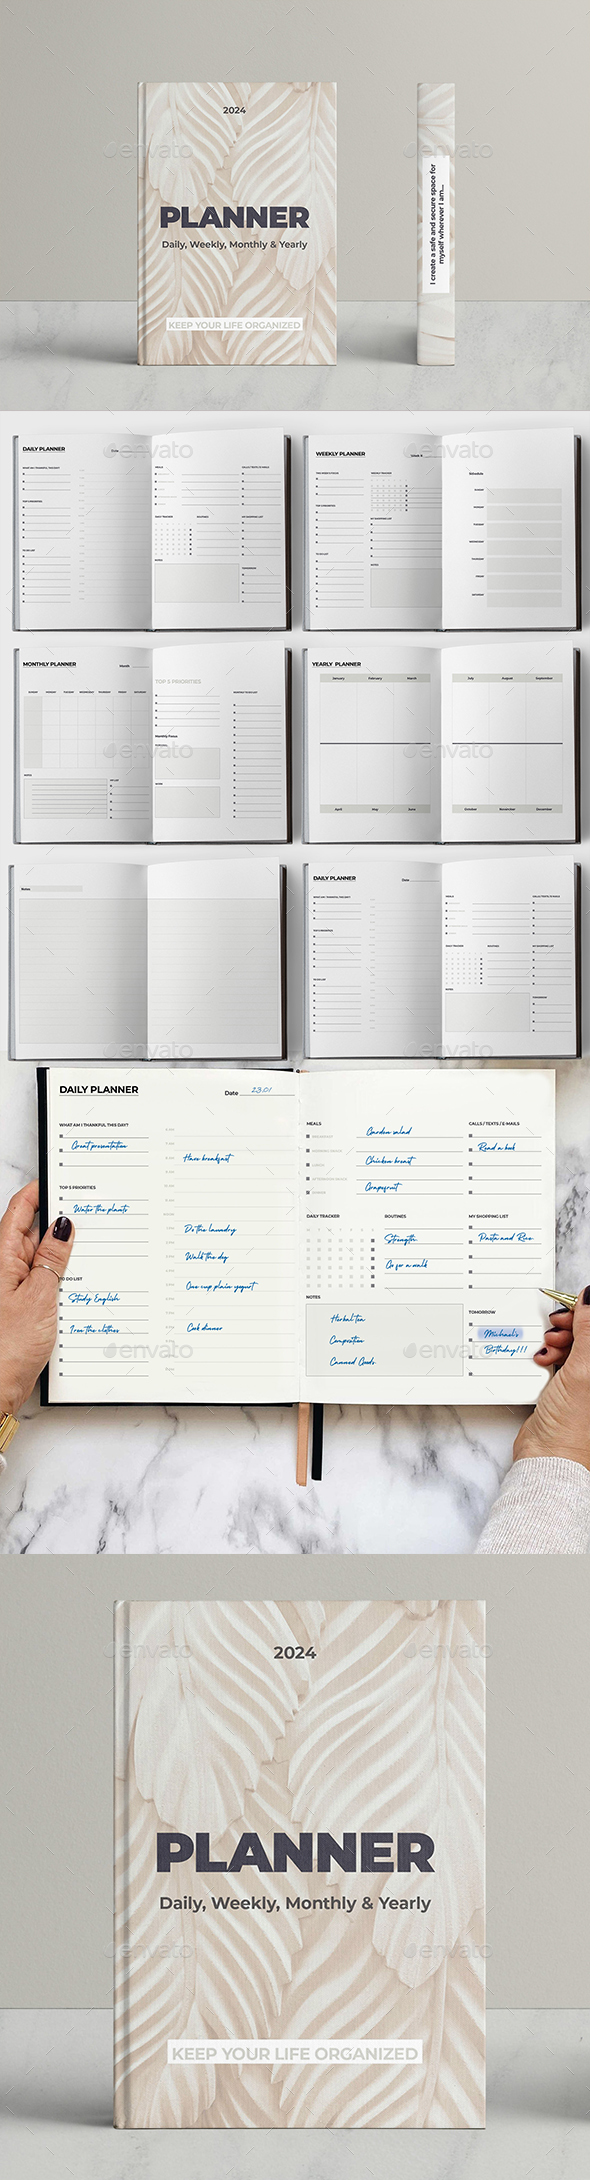 Annual Planner 2024 Template